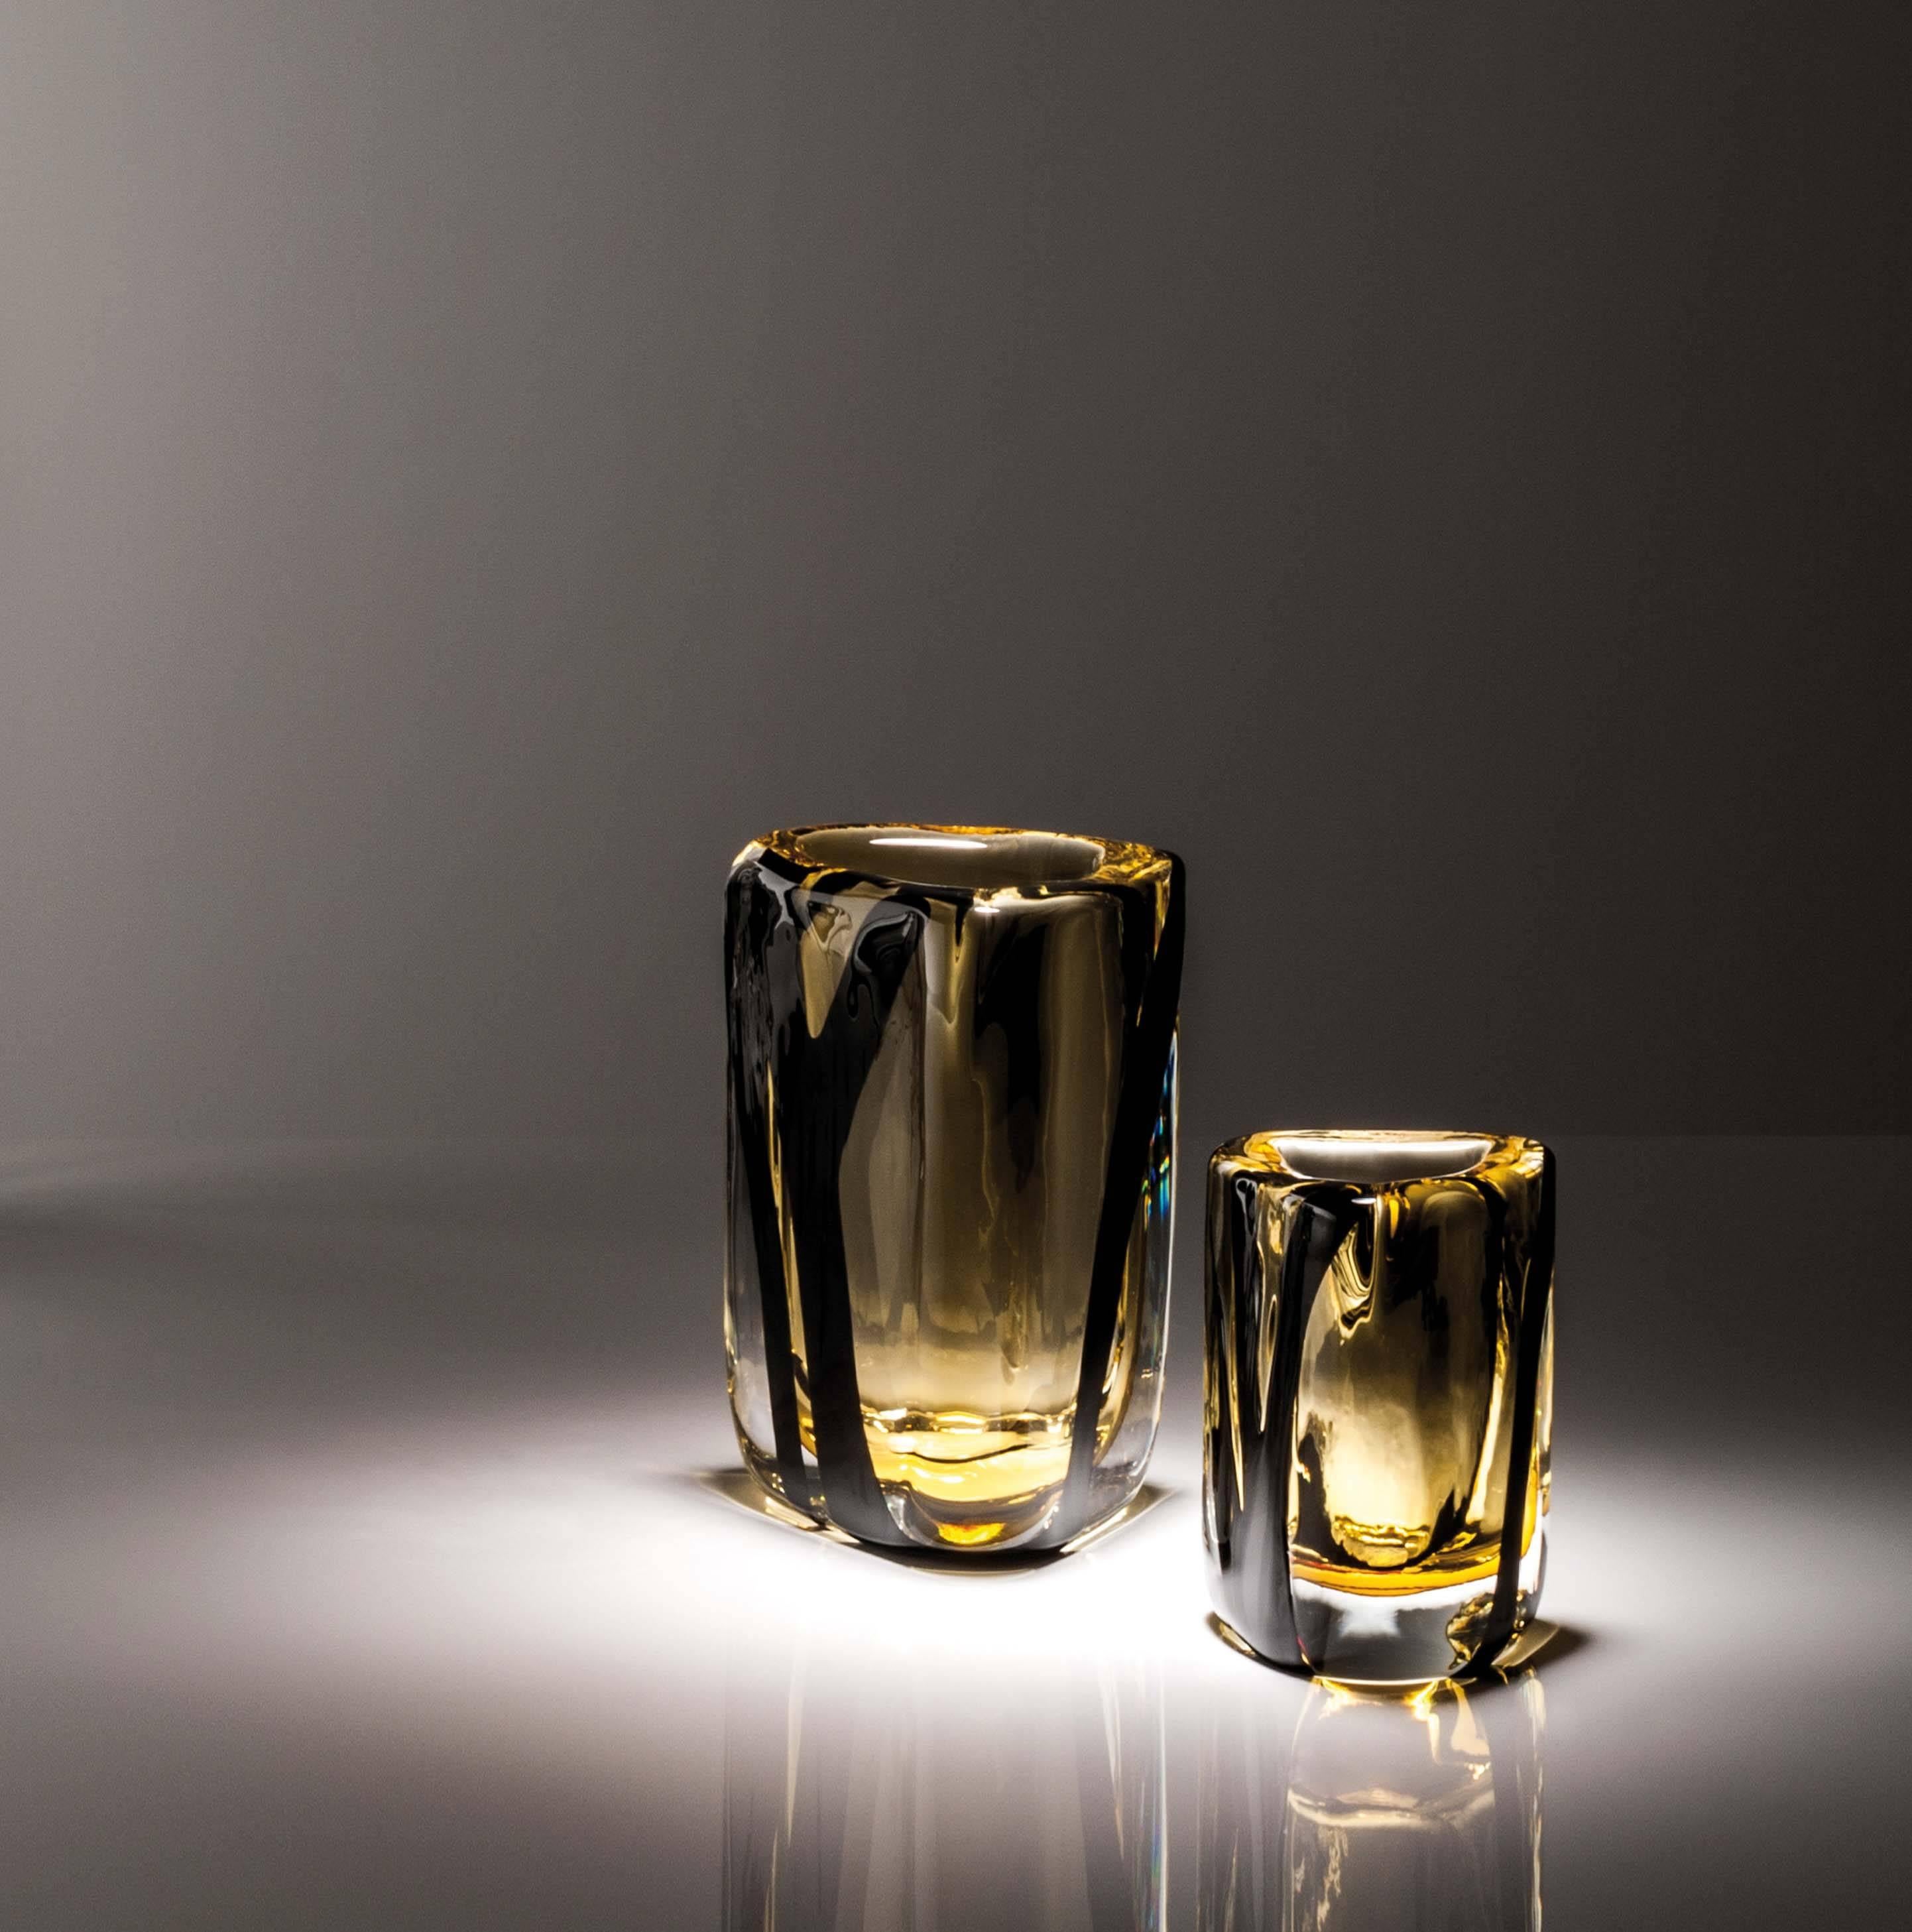 The Triangolo vase comes in three sizes and two different color-ways; the present example is the extra-small size with tea and black decoration. 

The vases from Peter Marino’s first collection of art glass evolved from his interest in the power